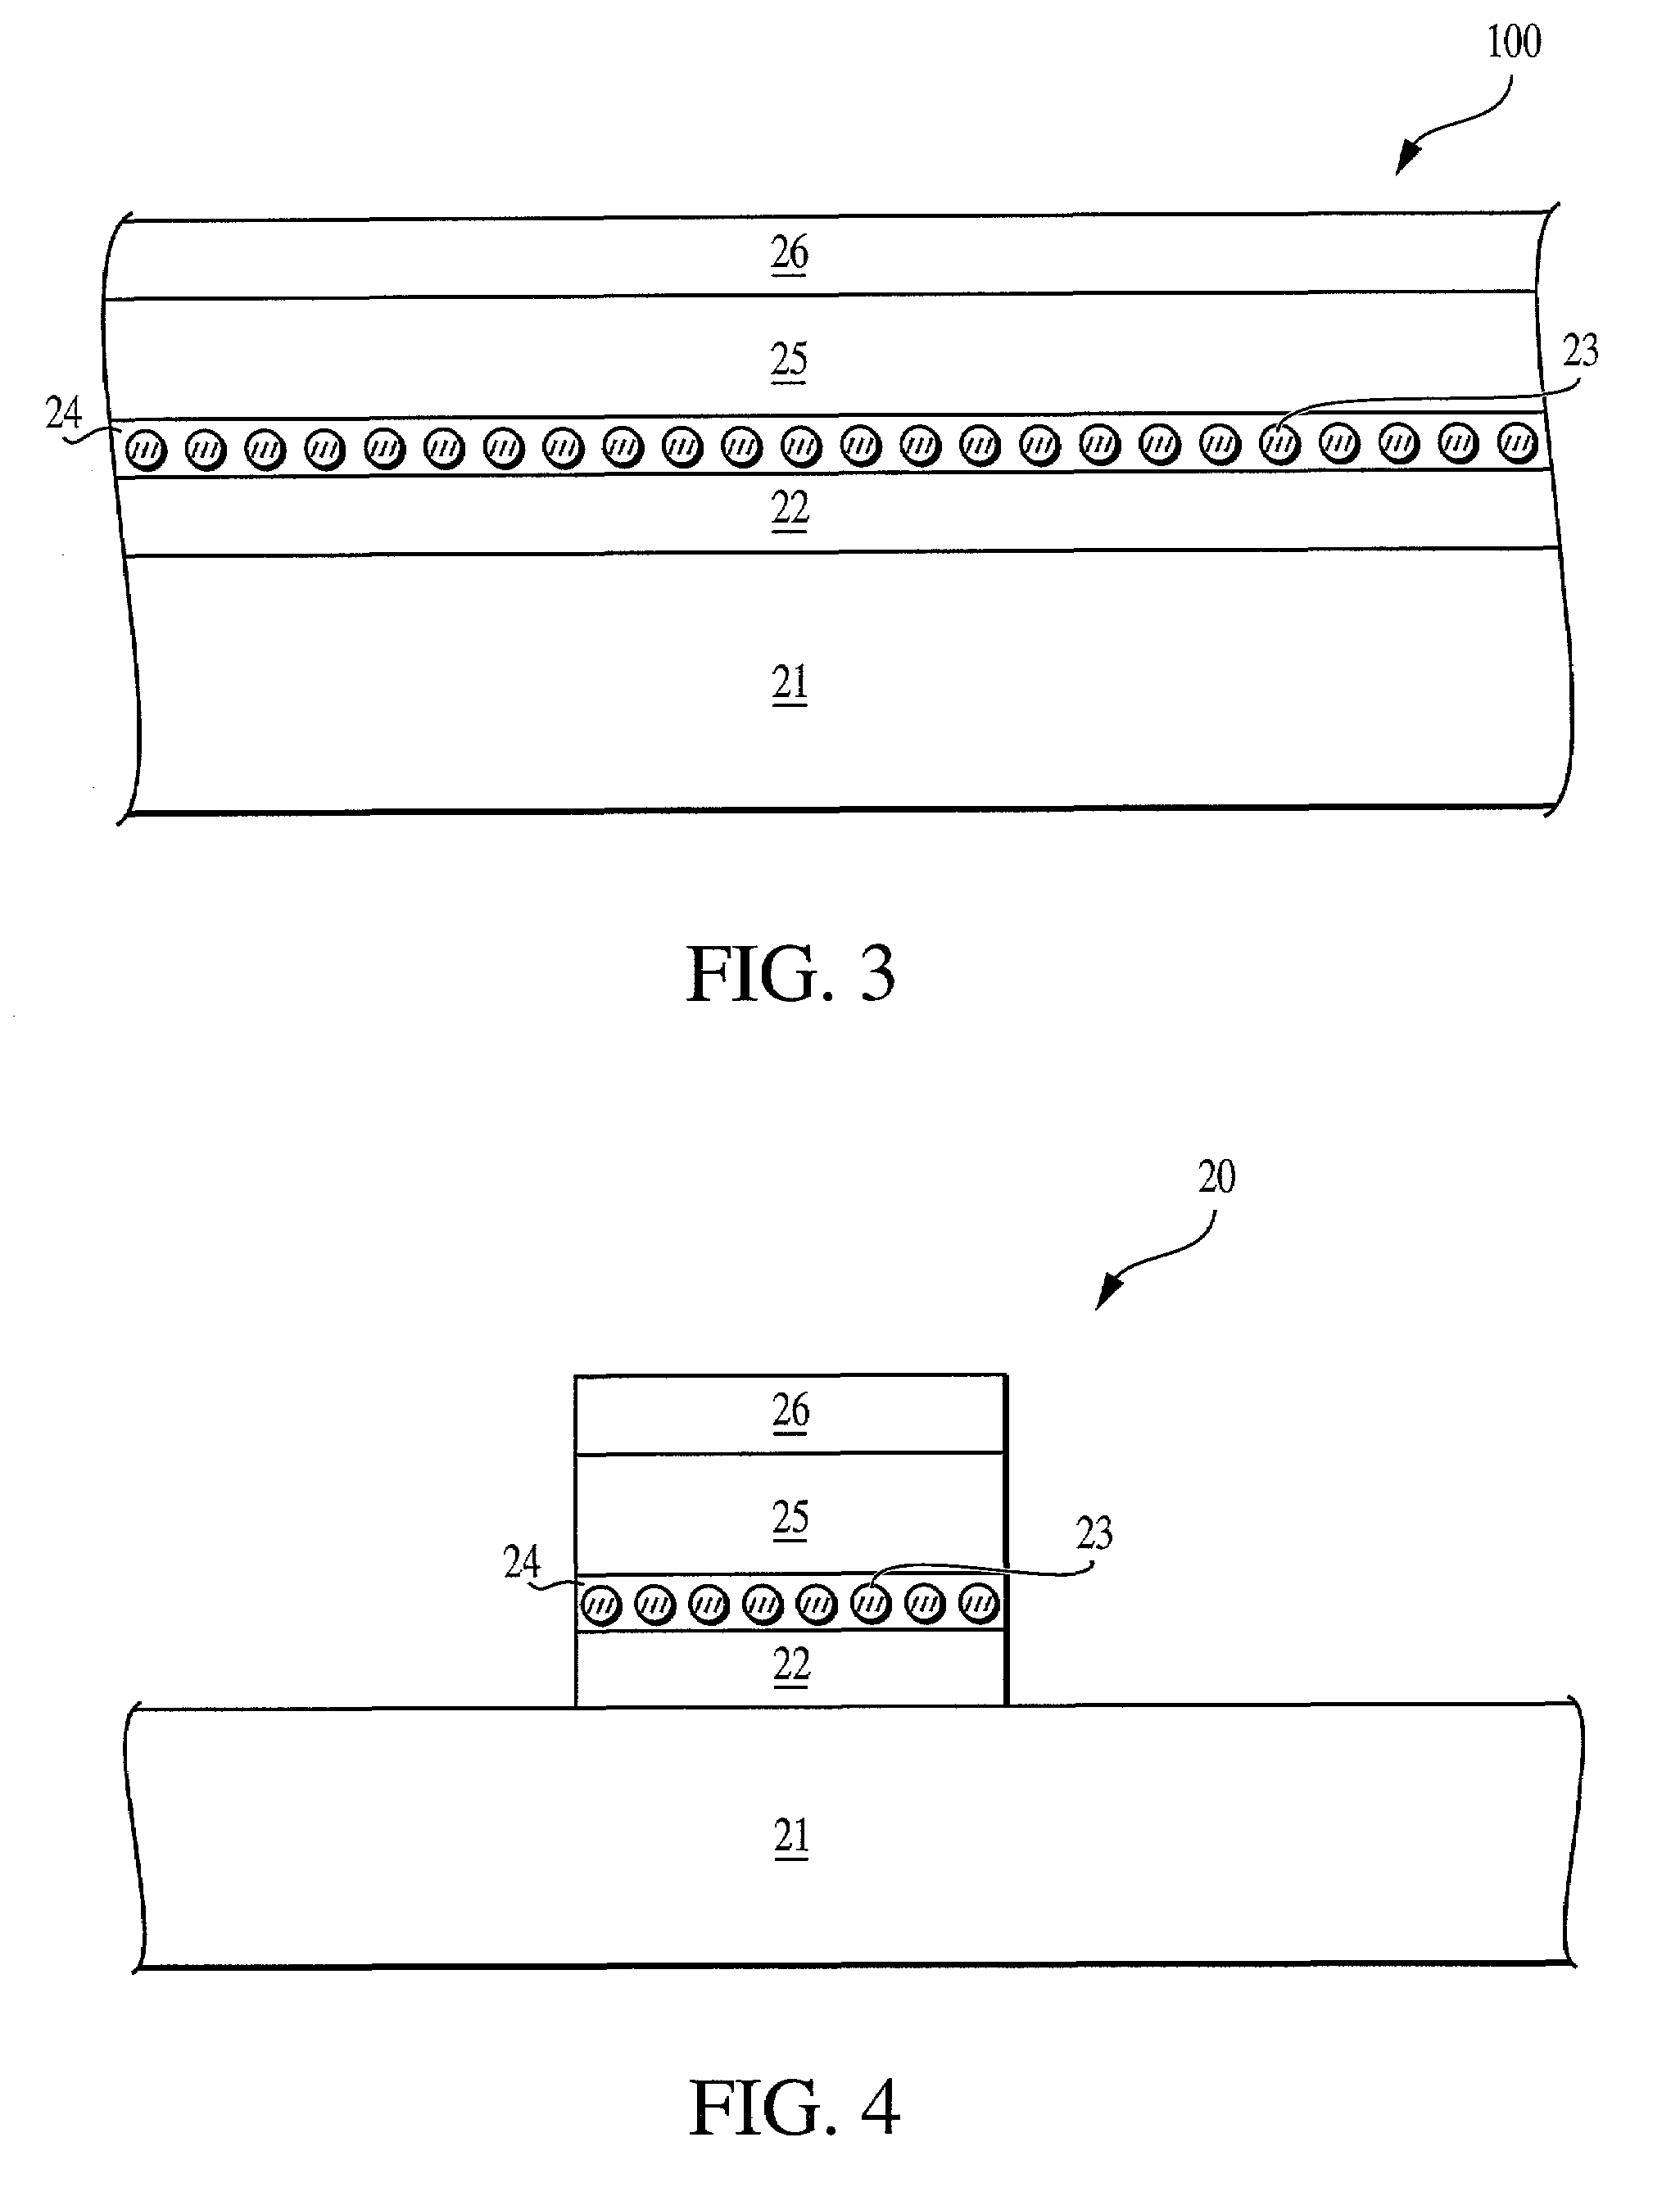 Method of forming a non-volatile electron storage memory and the resulting device